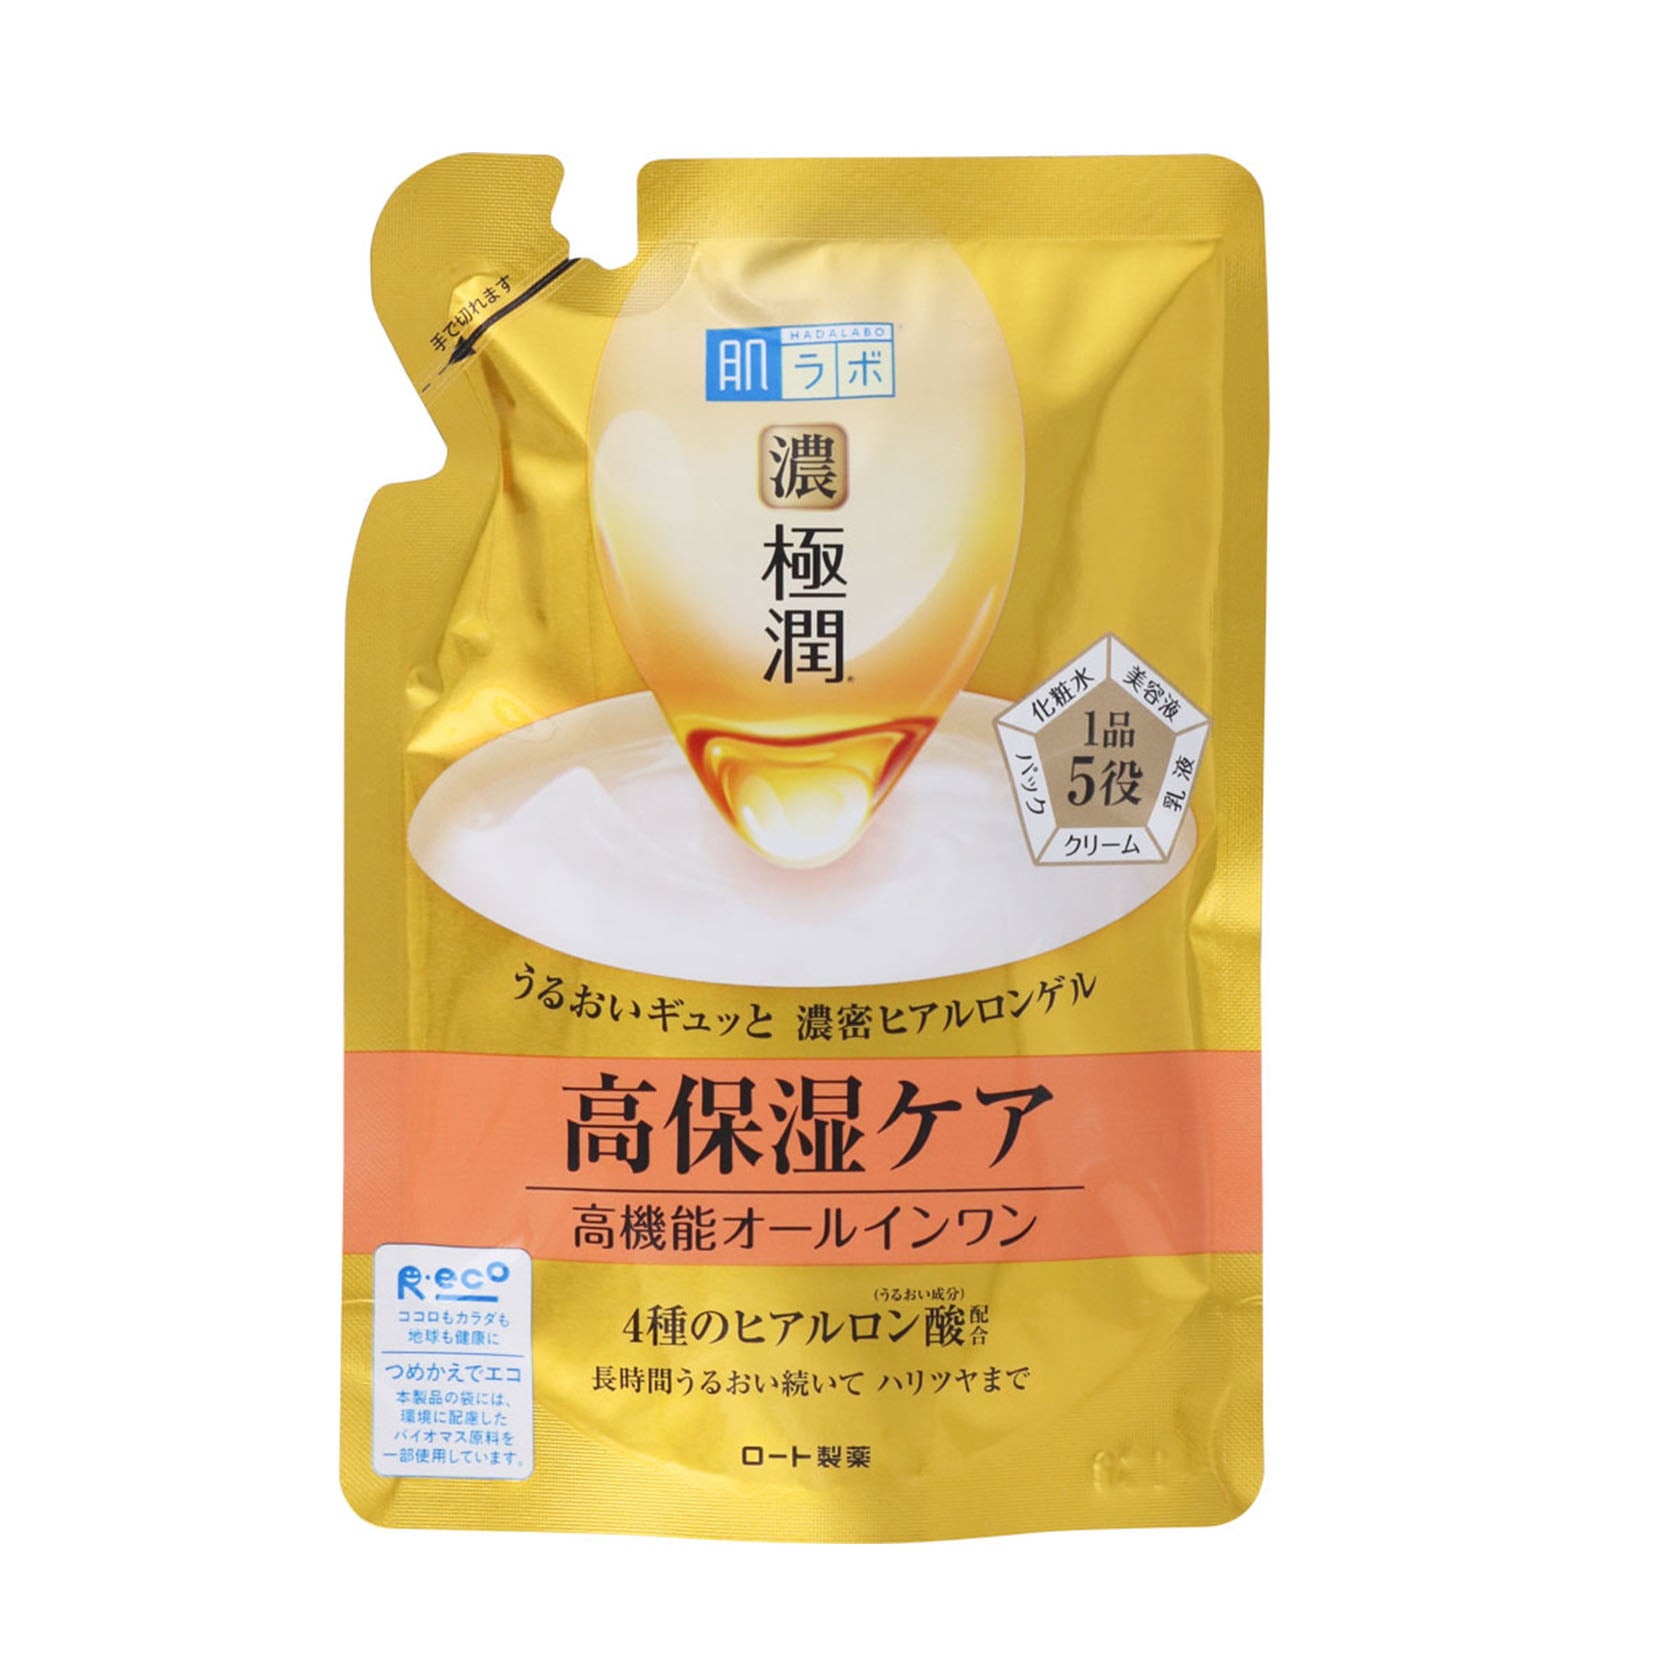 Rohto Hadalabo Thick Gokujun All In One Perfect Gel - 80g - Refill - Harajuku Culture Japan - Japanease Products Store Beauty and Stationery